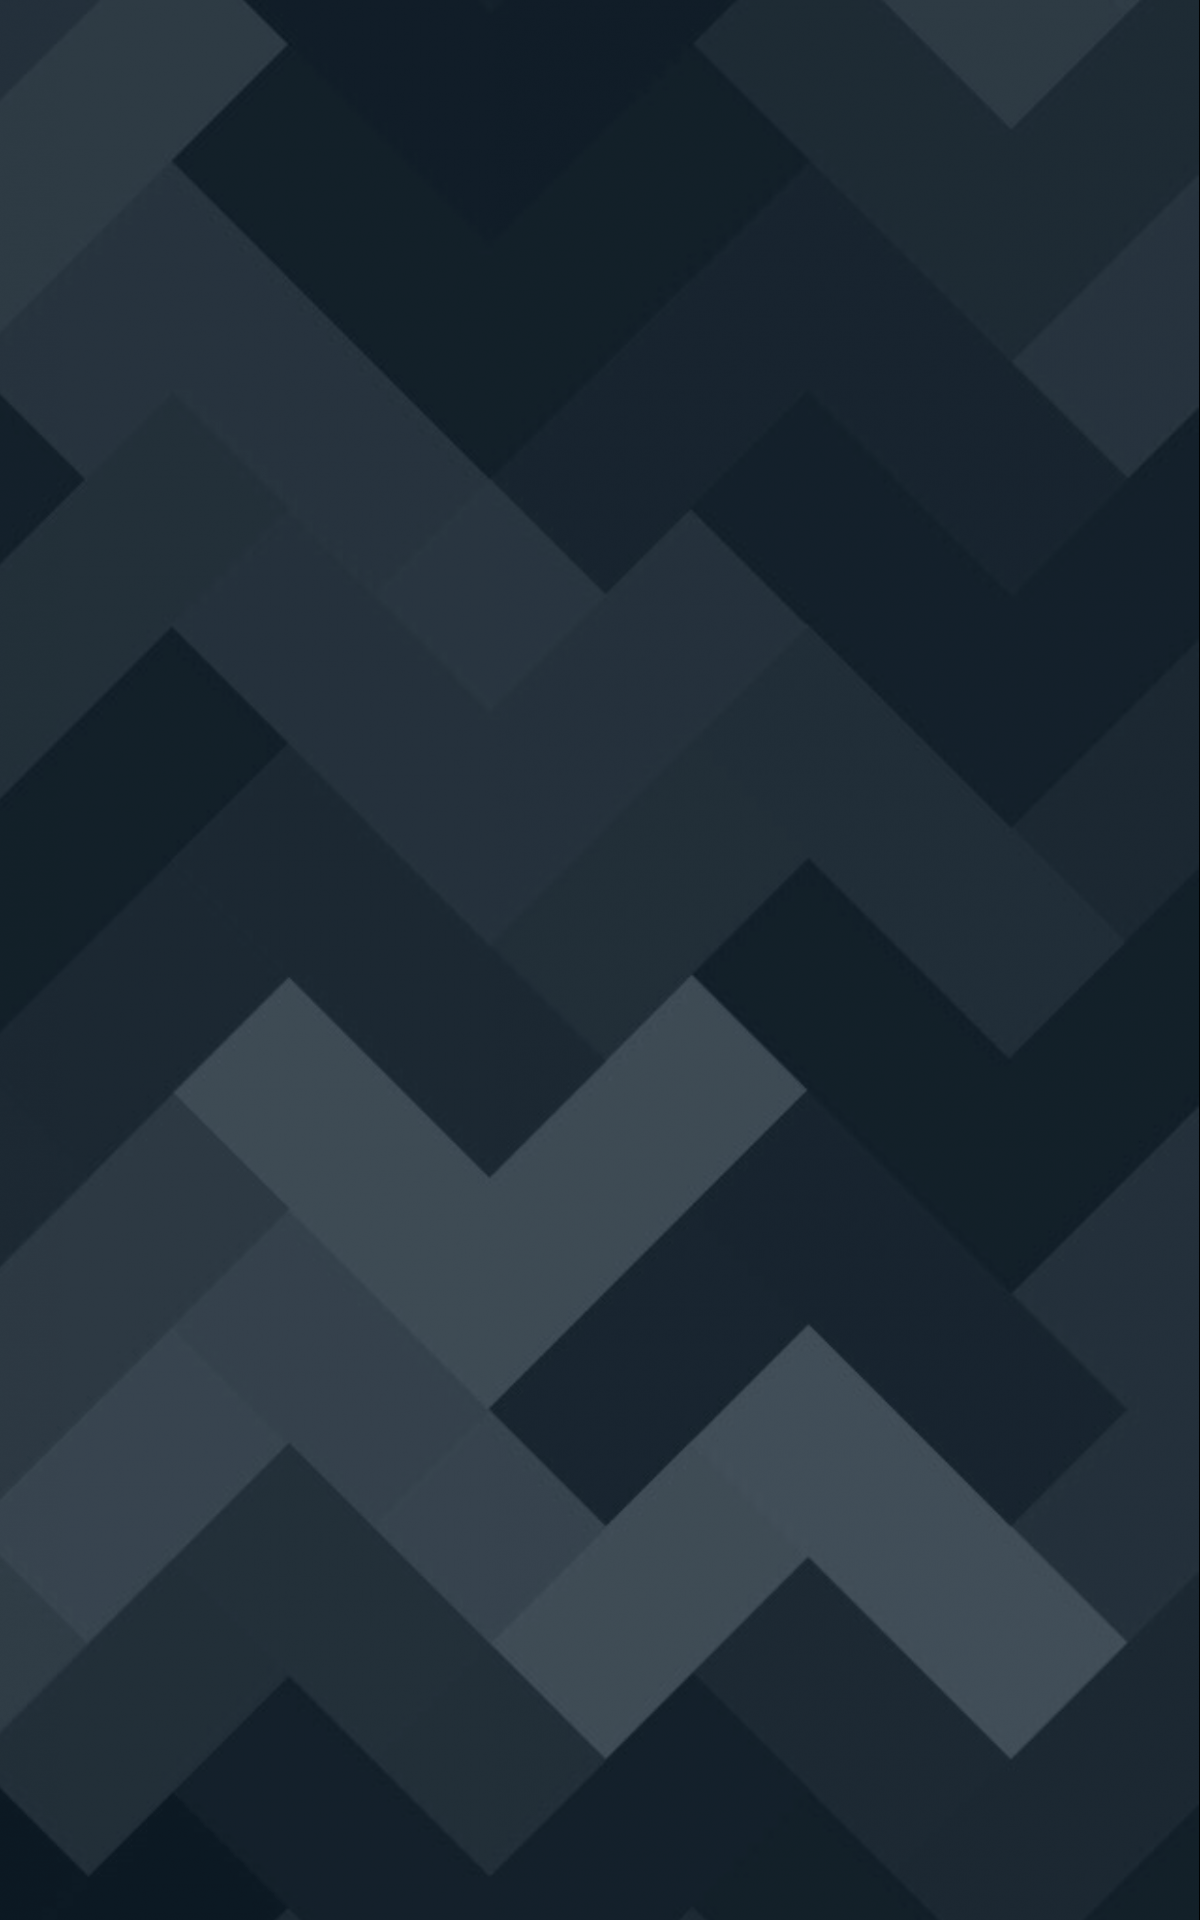 Free download Wallpaper of the week geometric wallpaper for iPhone [1242x2208] for your Desktop, Mobile & Tablet. Explore Dark Phone Wallpaper. Dark Desktop Wallpaper, Dark Background Wallpaper, Best Dark Wallpaper